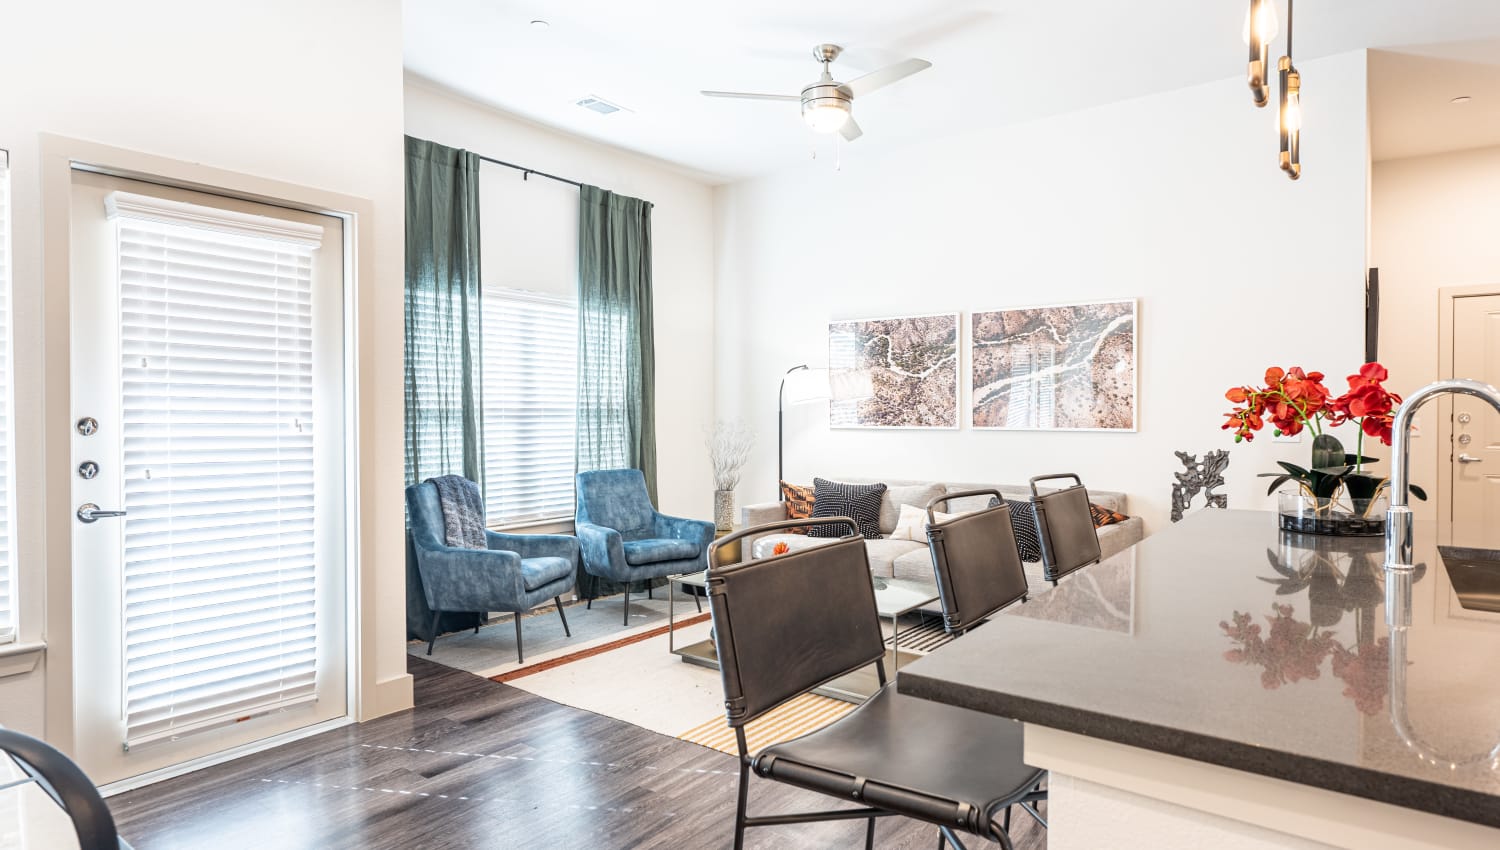 Living space with blue accents at The Everett at Ally Village in Midland, Texas